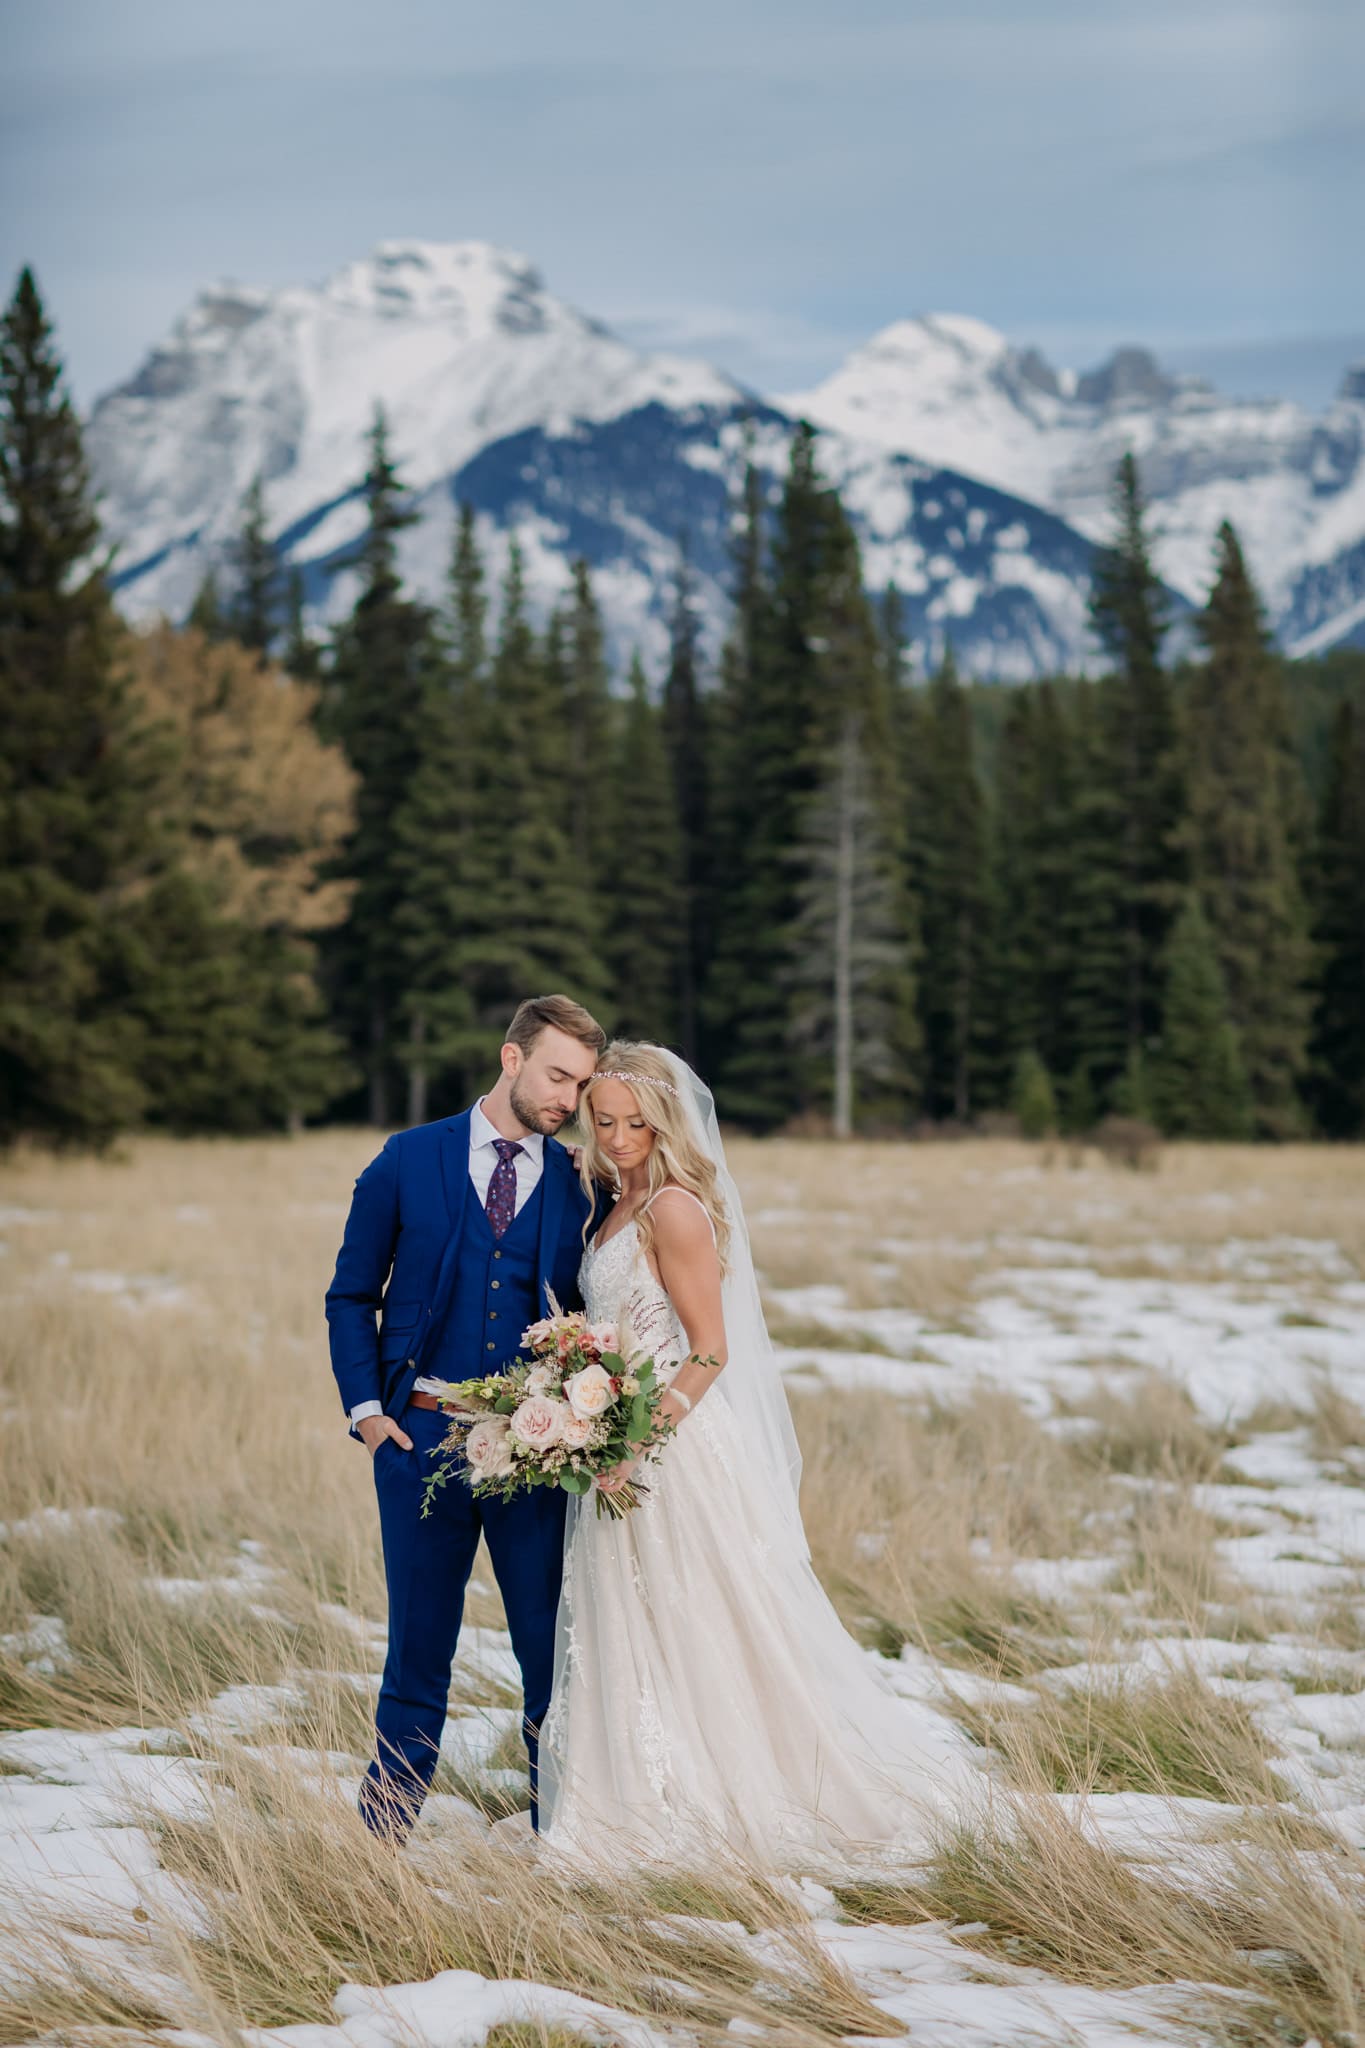 A Guide to Eloping in the Canadian Rockies | Mountain Wedding photographed by ENV Photography | fall wedding in Banff National Park with fresh snow